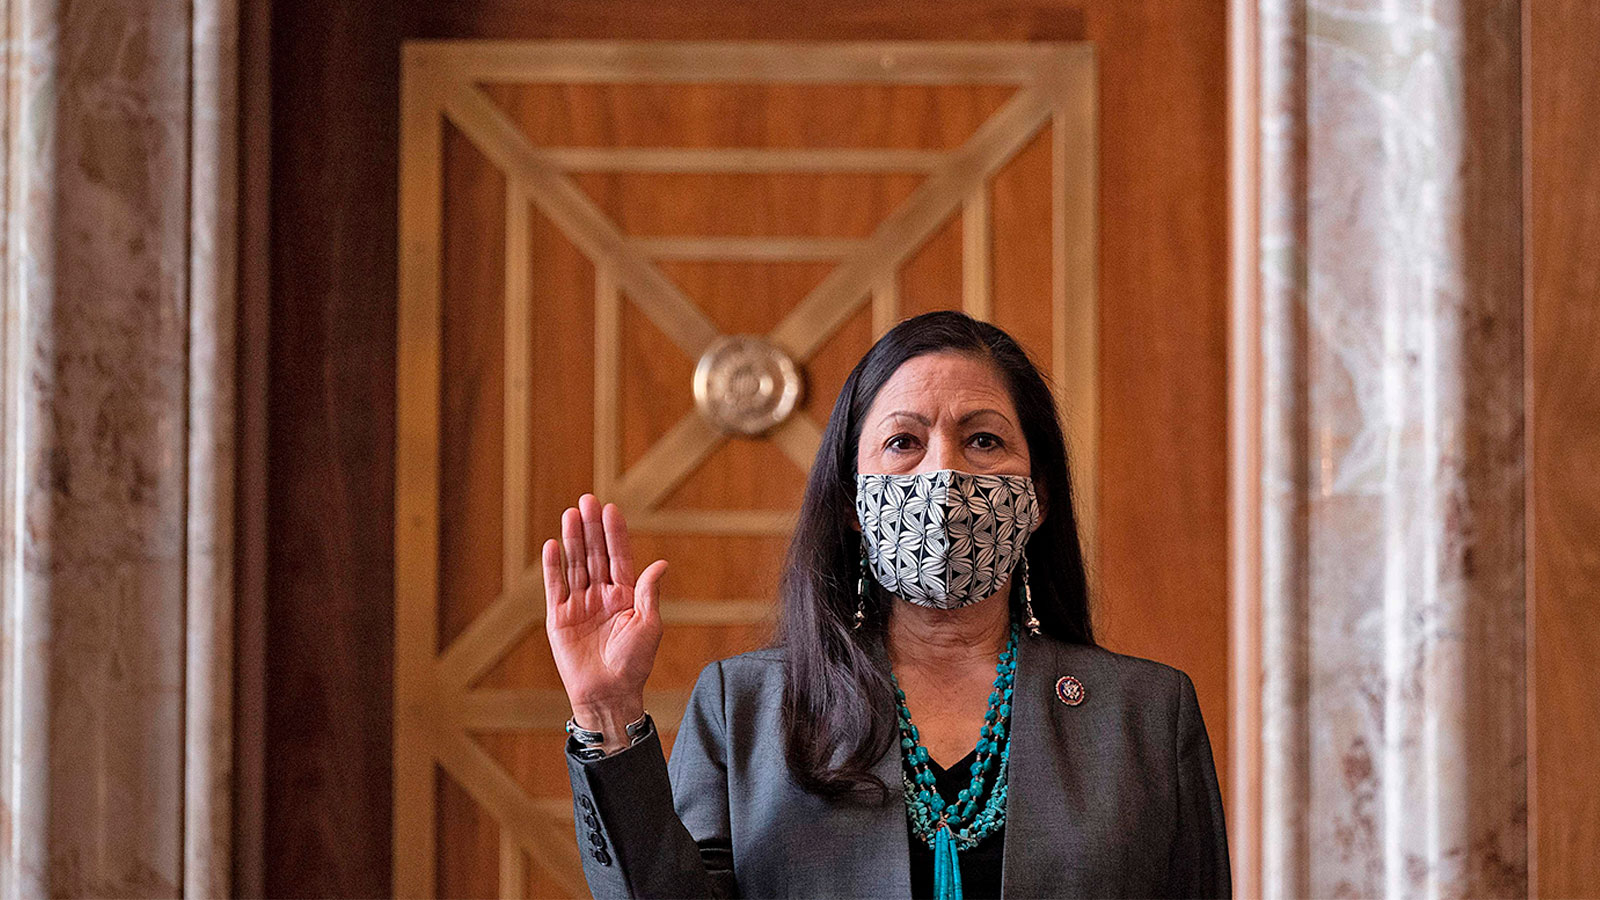 A photograph of Congresswoman Deb Haaland, D-N.M., is sworn in during the Senate Committee on Energy and Natural Resources hearing on her nomination to be Interior Secretary on Capitol Hill in Washington, DC, on February 23, 2021.